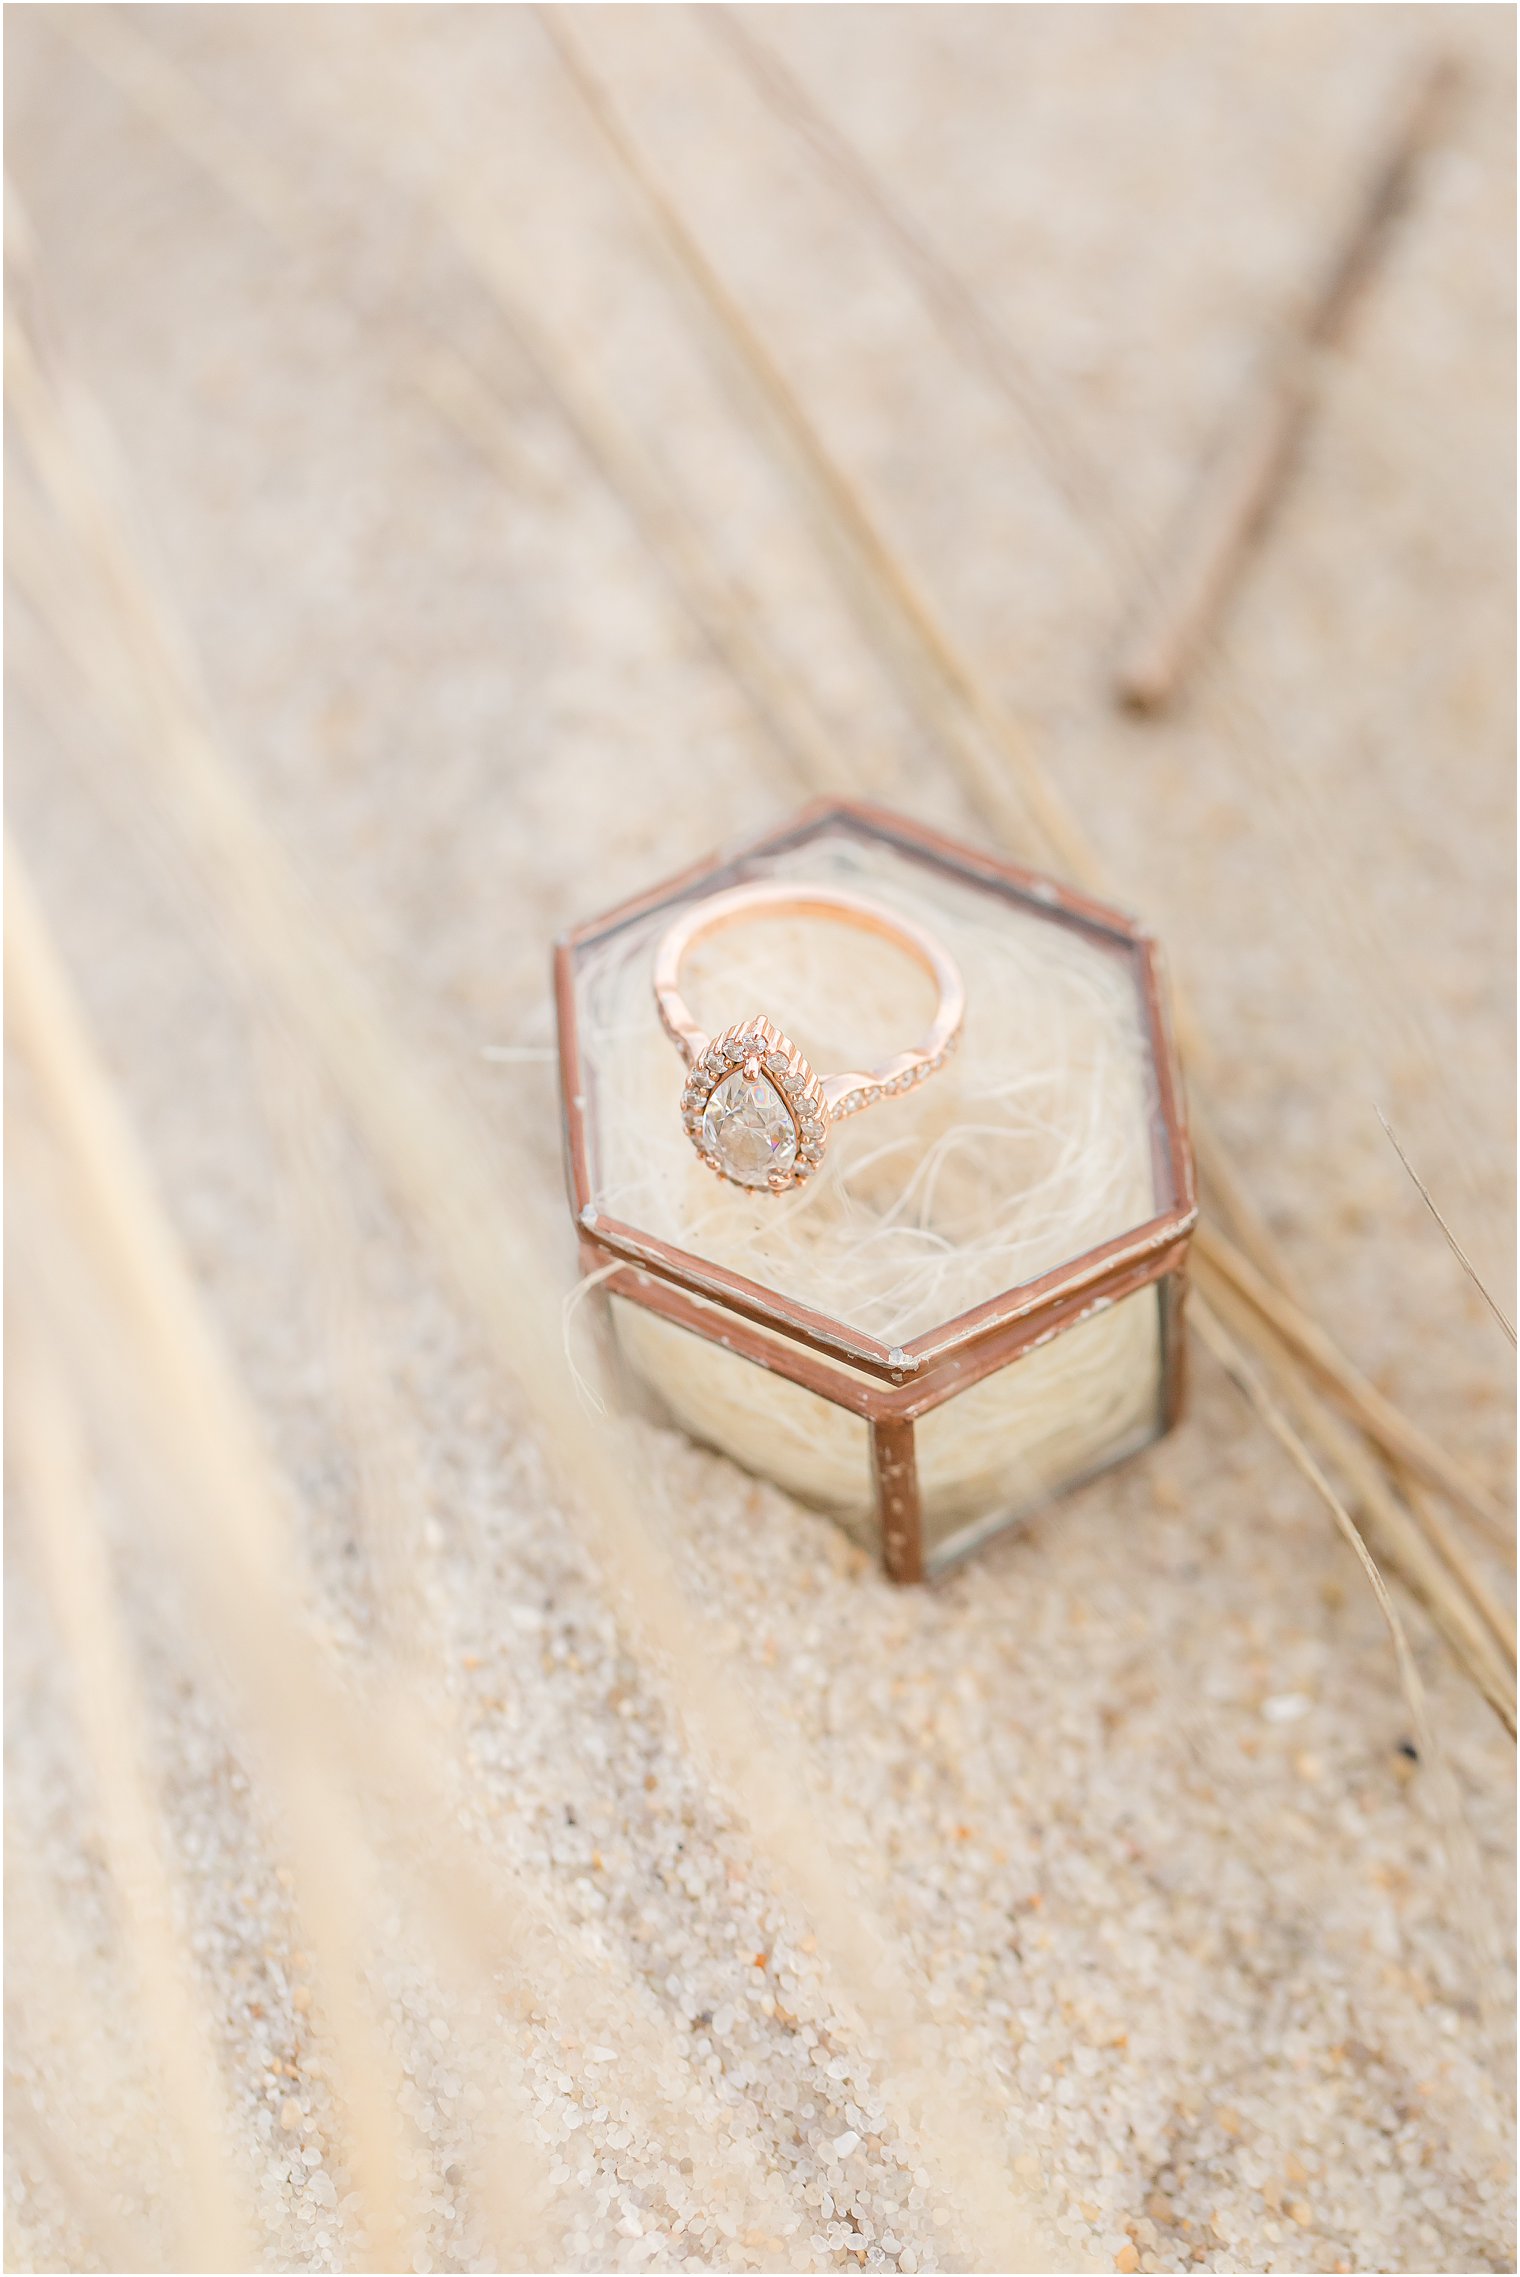 Pear shaped engagement ring in a geometric glass box